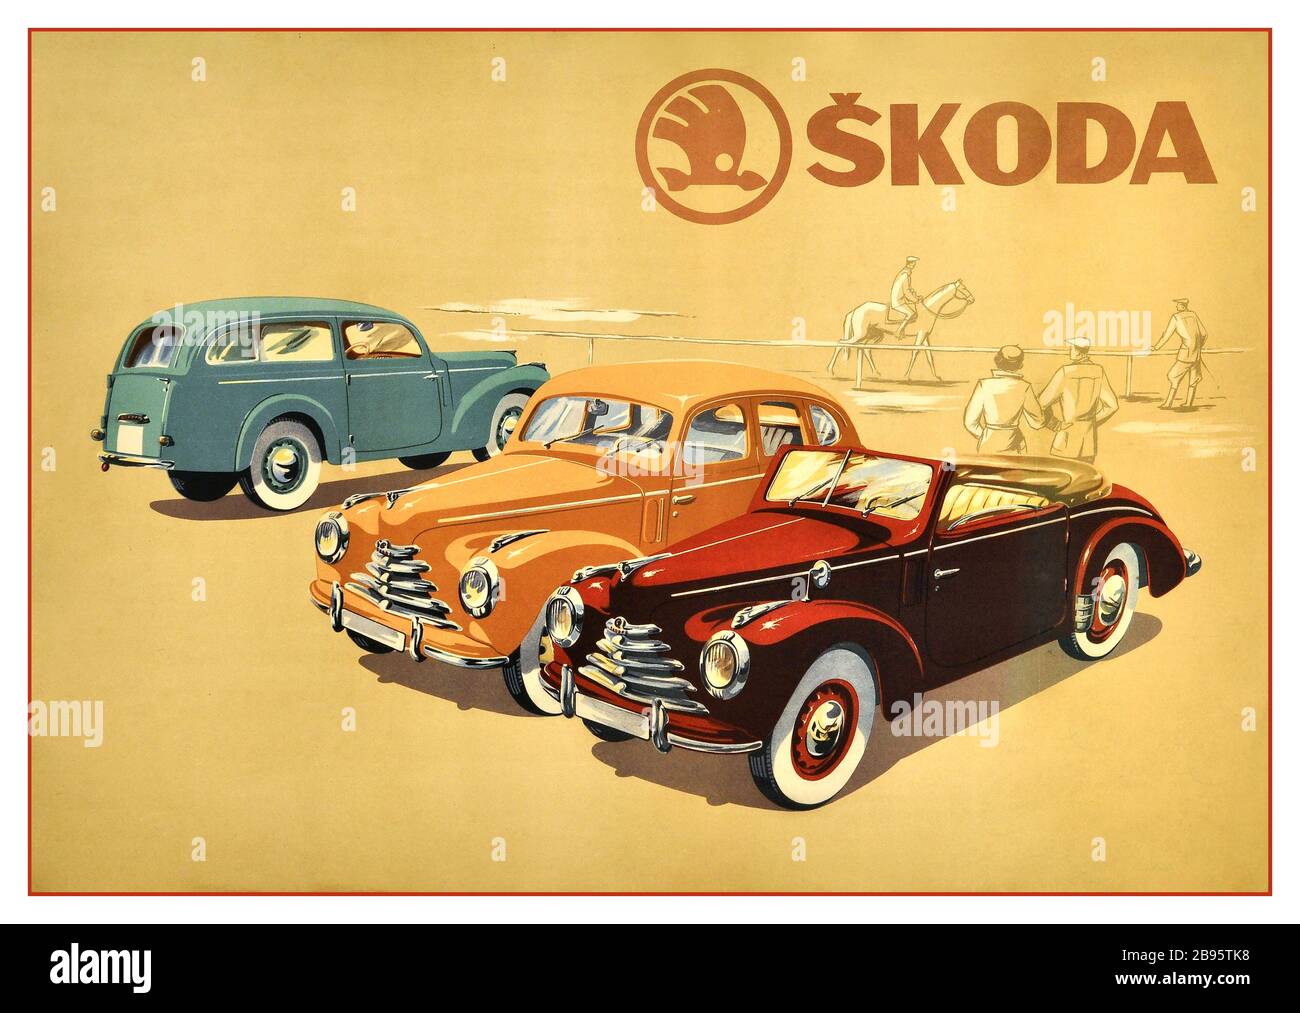 SKODA Vintage 1950s car motorcar poster advertising Skoda featuring three car models lined up - a convertible, saloon and station wagon with a horse rider and spectators in the background. Skoda Auto is a Czech car manufacturer founded in 1895 and is one of the five oldest car producing companies in the world with an unbroken history (the company opened as Laurin & Klement, in operation from 1895-1925 when it was acquired by Skoda Works, in operation from 1925-2000 when it was acquired by the Volkswagen Group). Printed by Neubert, Paha. Czechoslovakia,  c 1950s, Stock Photo